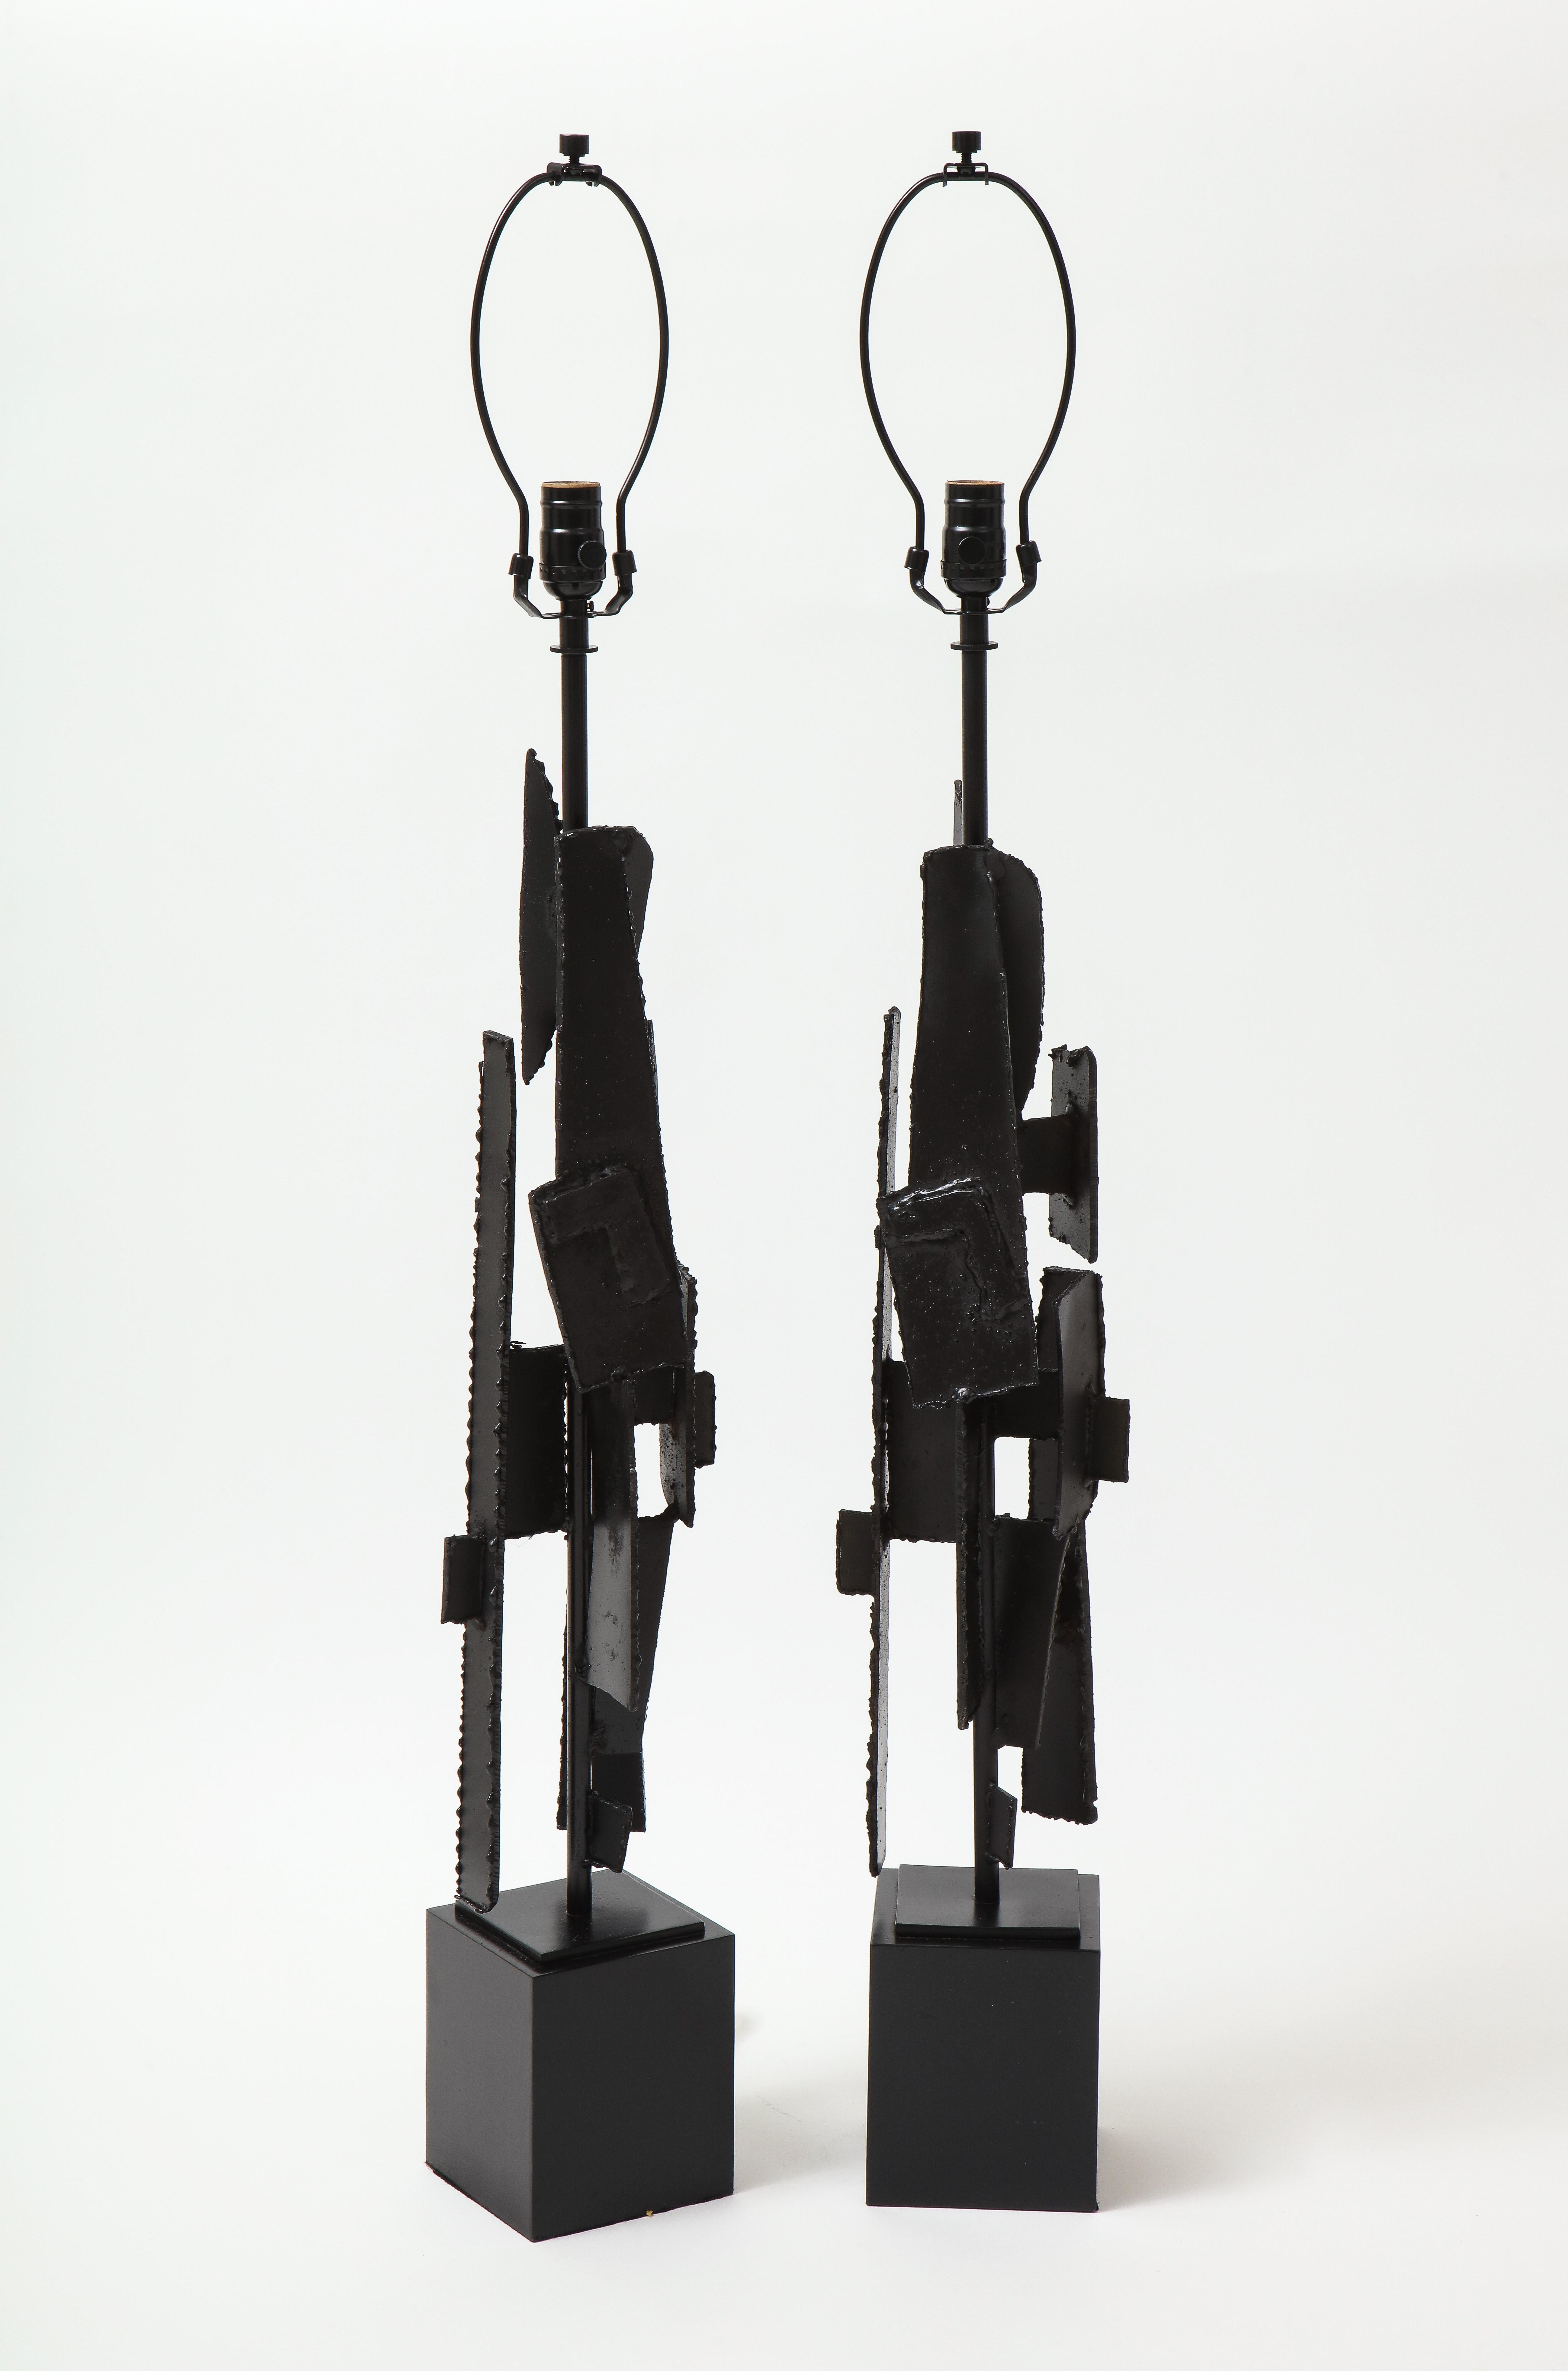 Mid Century/Brutalist torch cut steel sculptural lamps in a black enamel finish. Rewired for use in the USA, 100W max.